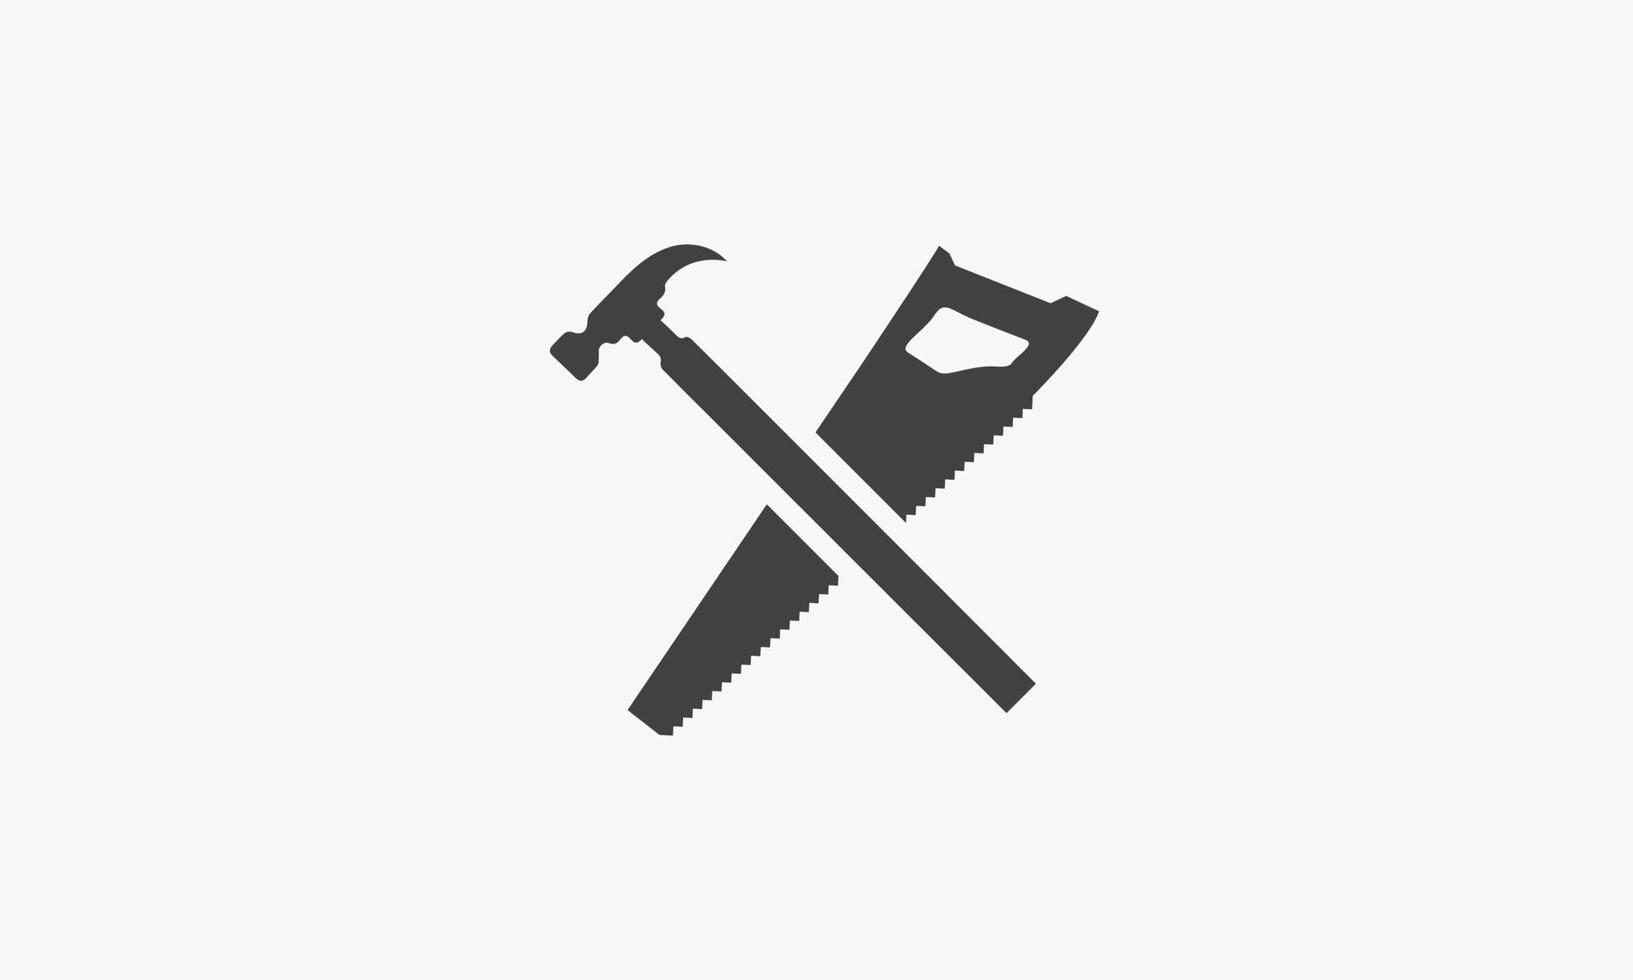 hand saw hammer croossed icon design flat vector. isolated on white background. vector